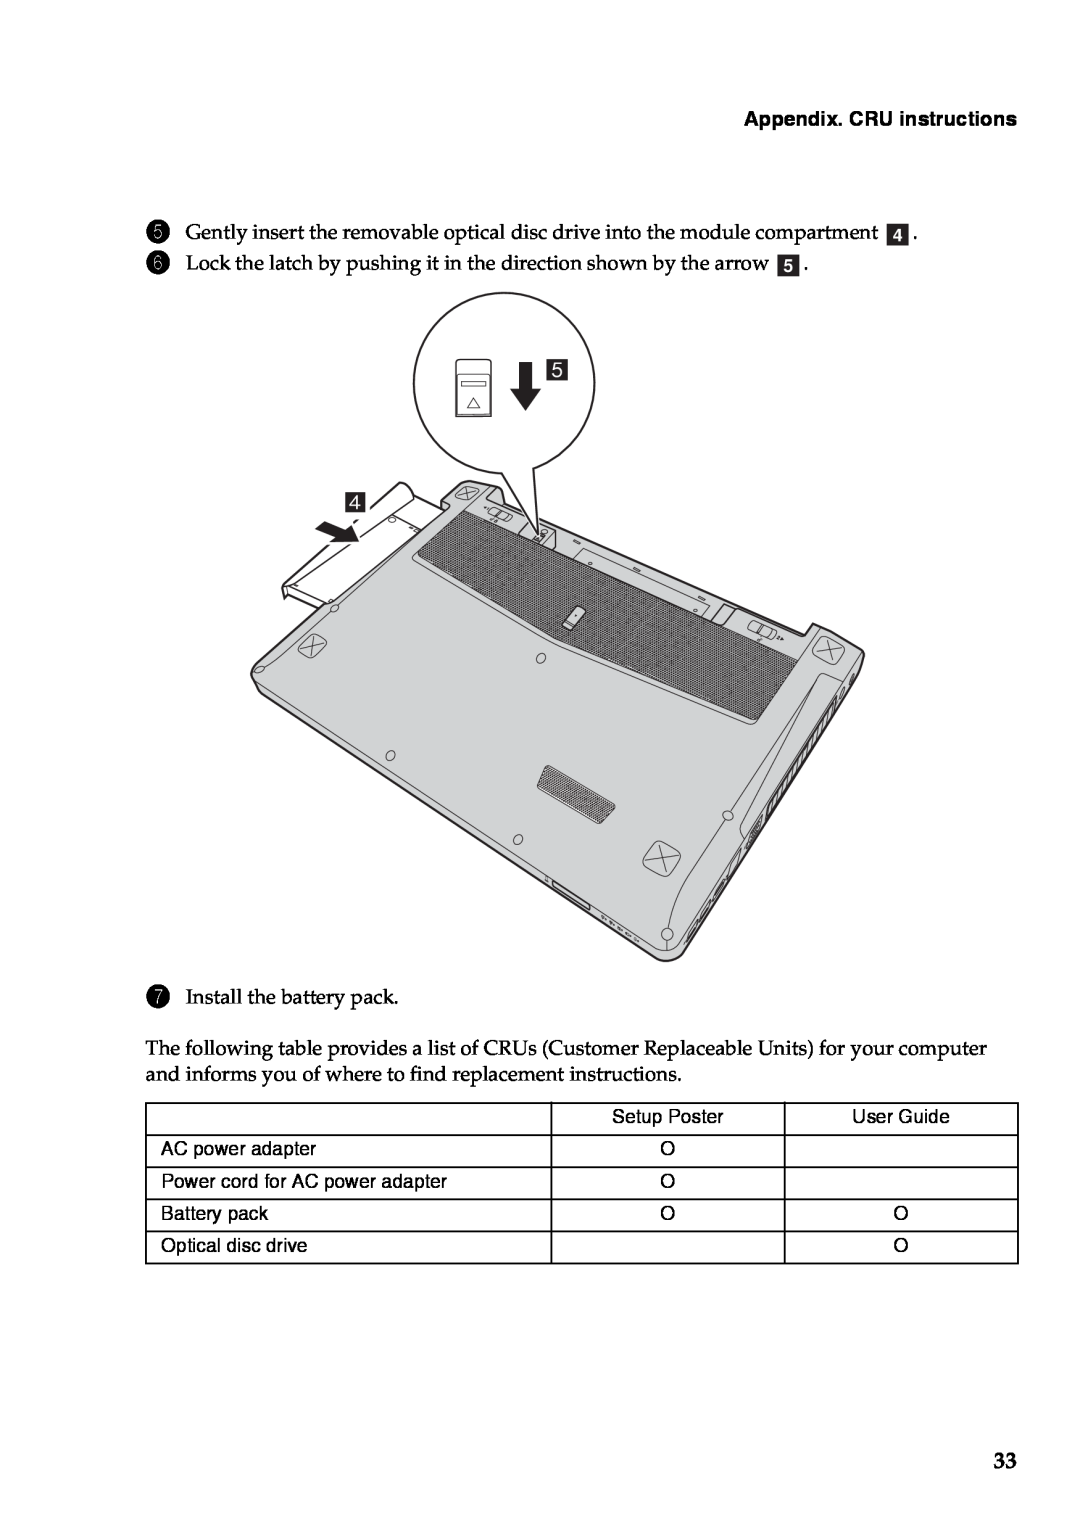 Lenovo 59376431, 59375627 Appendix. CRU instructions, Lock the latch by pushing it in the direction shown by the arrow e 